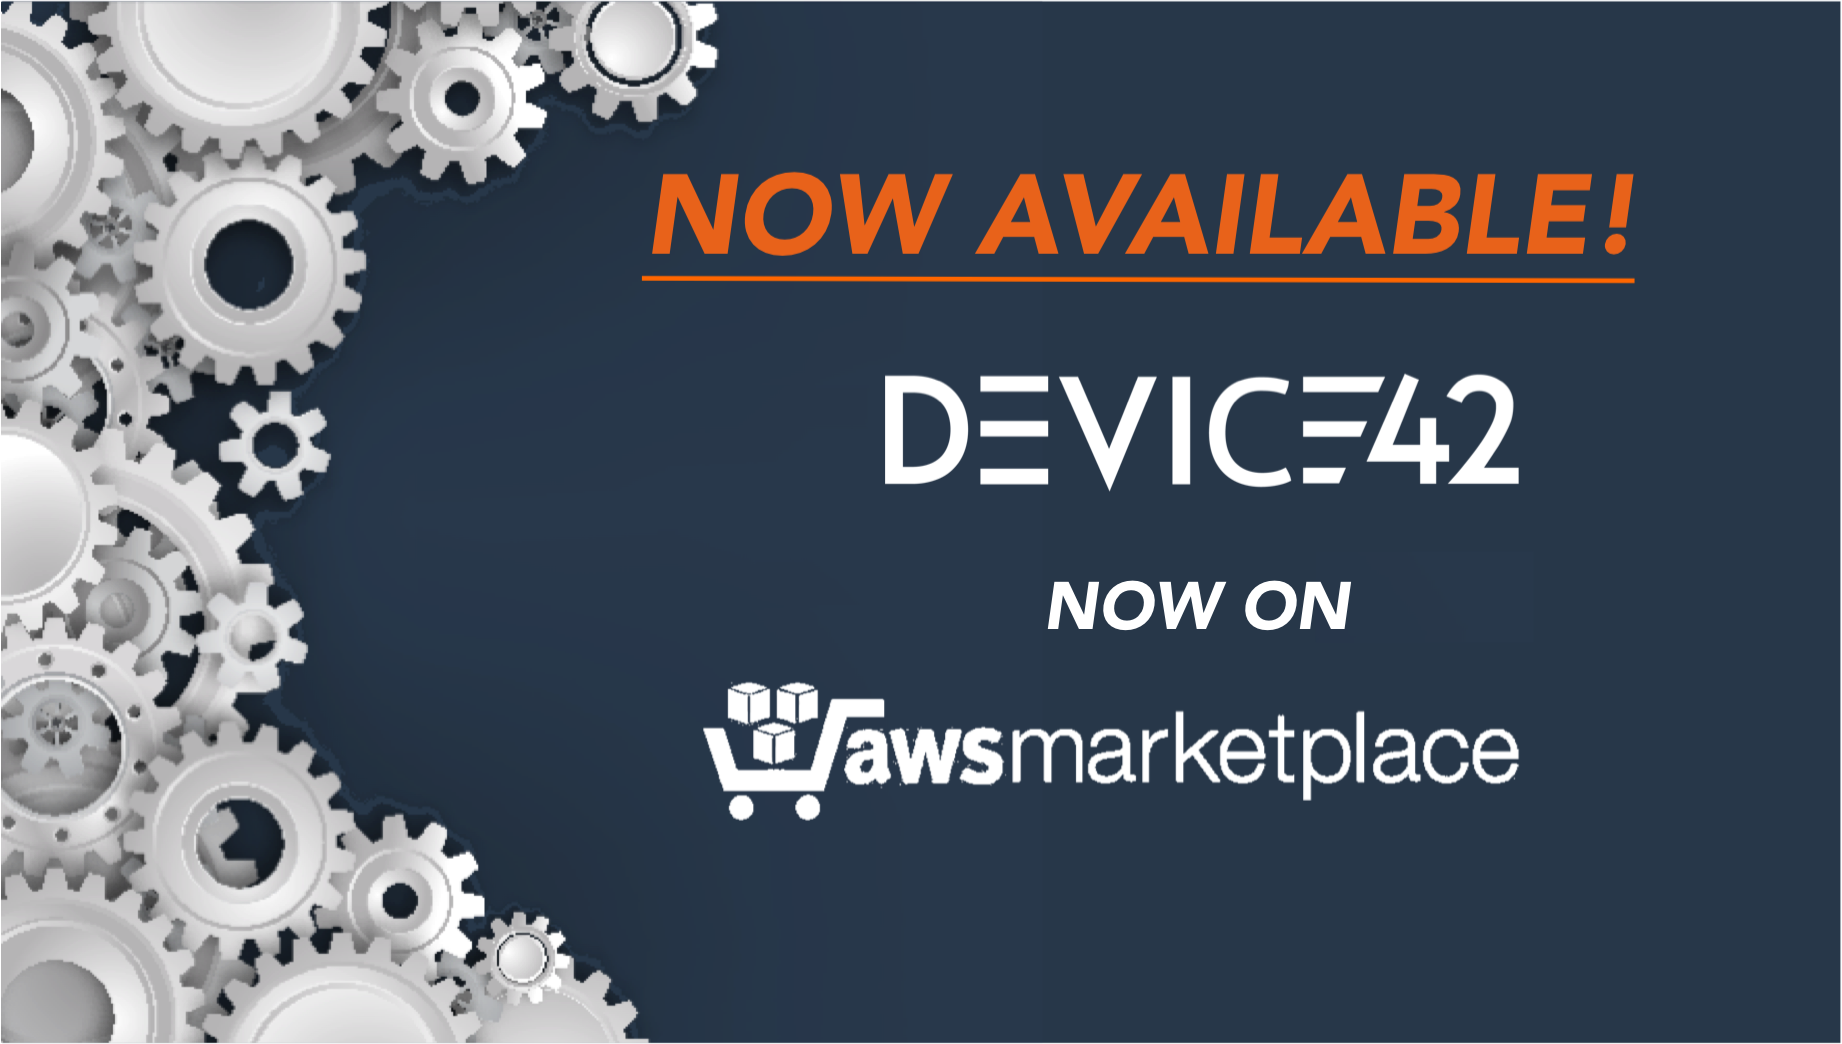 Device42 now on AWS Marketplace